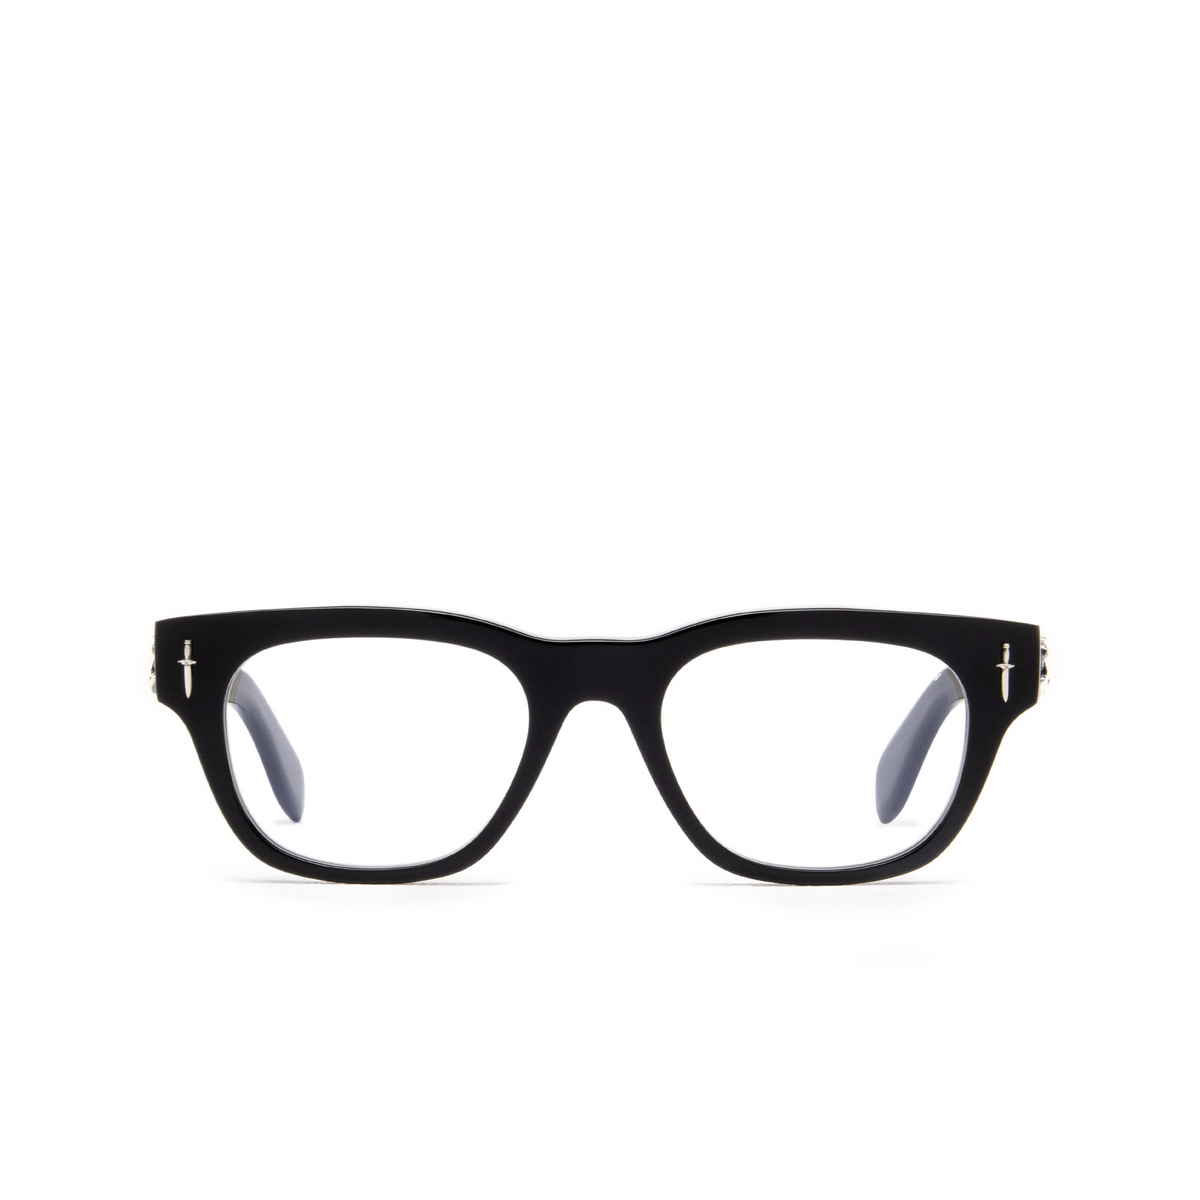 Cutler and Gross 003 Eyeglasses 01 Black - front view